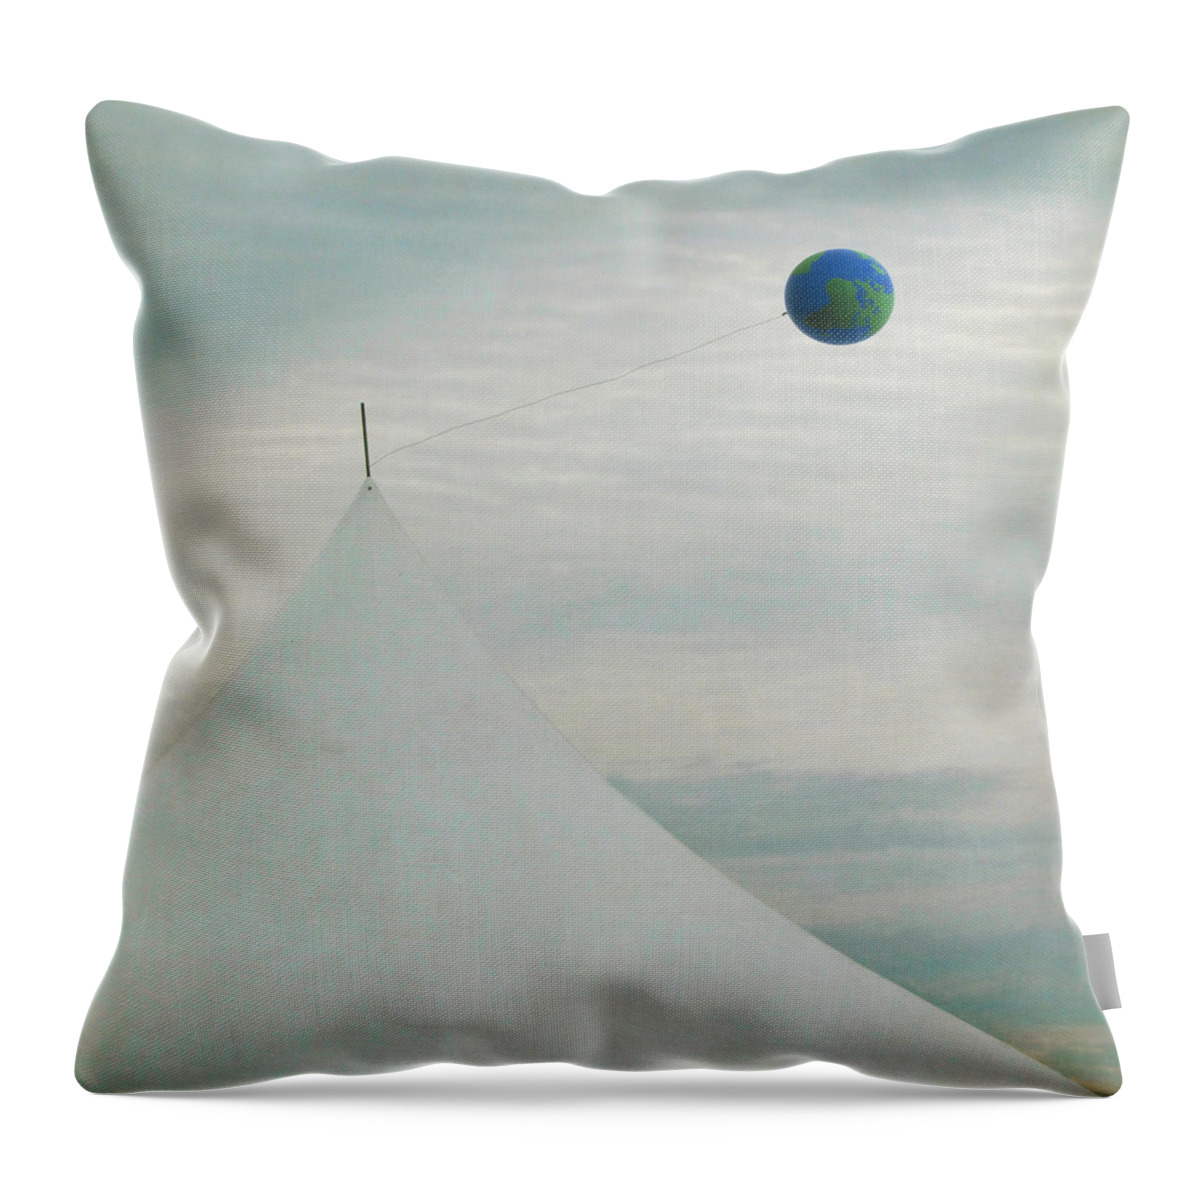 Mid-air Throw Pillow featuring the photograph White Tent With Earth Balloon by Francois Dion